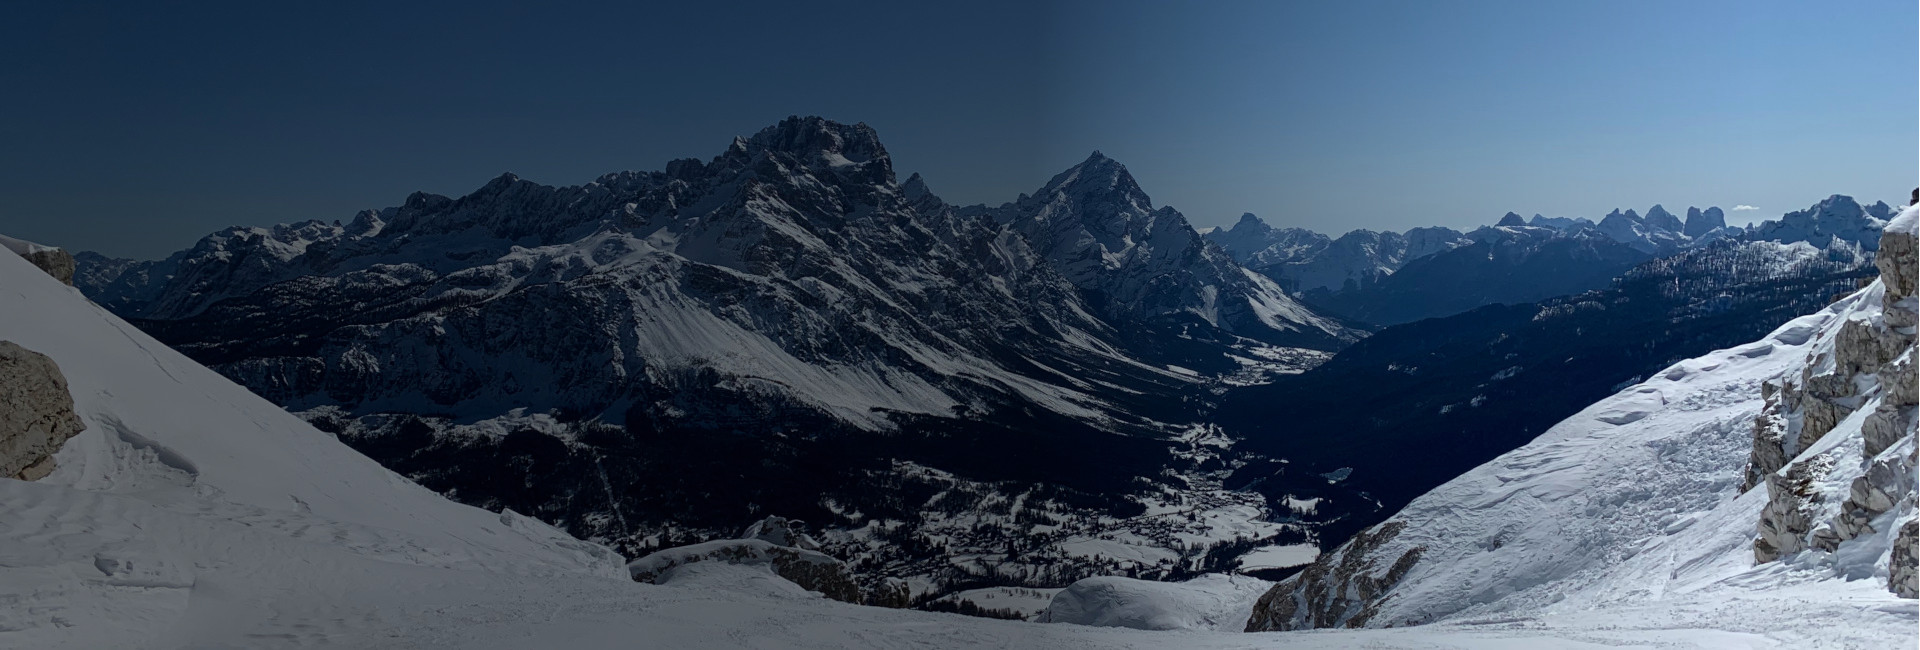 Panoramic view of the mountains of Cortina d'Ampezzo